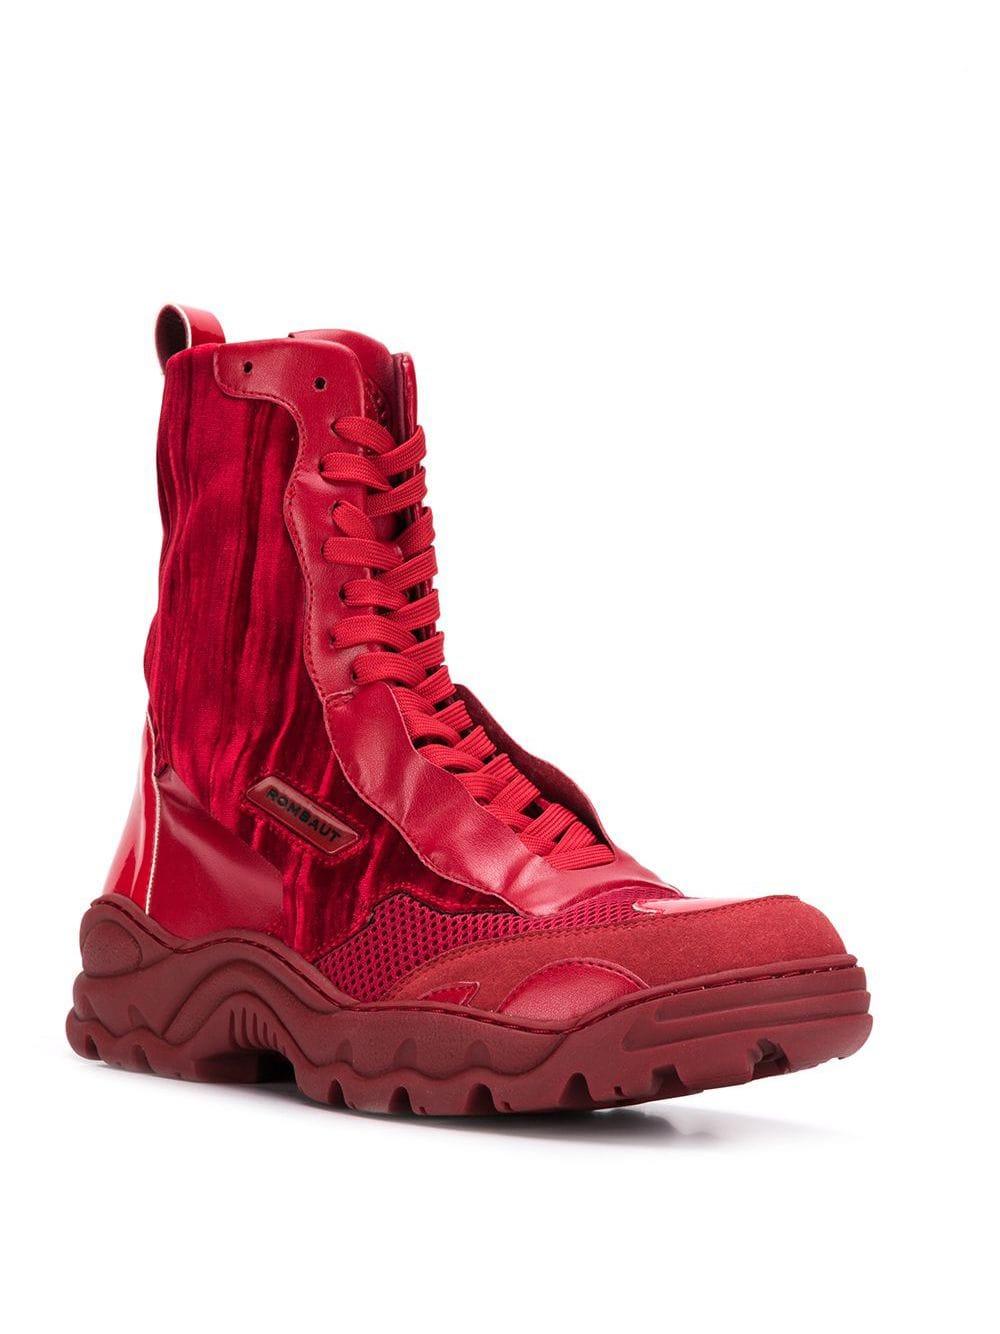 red sneaker boots